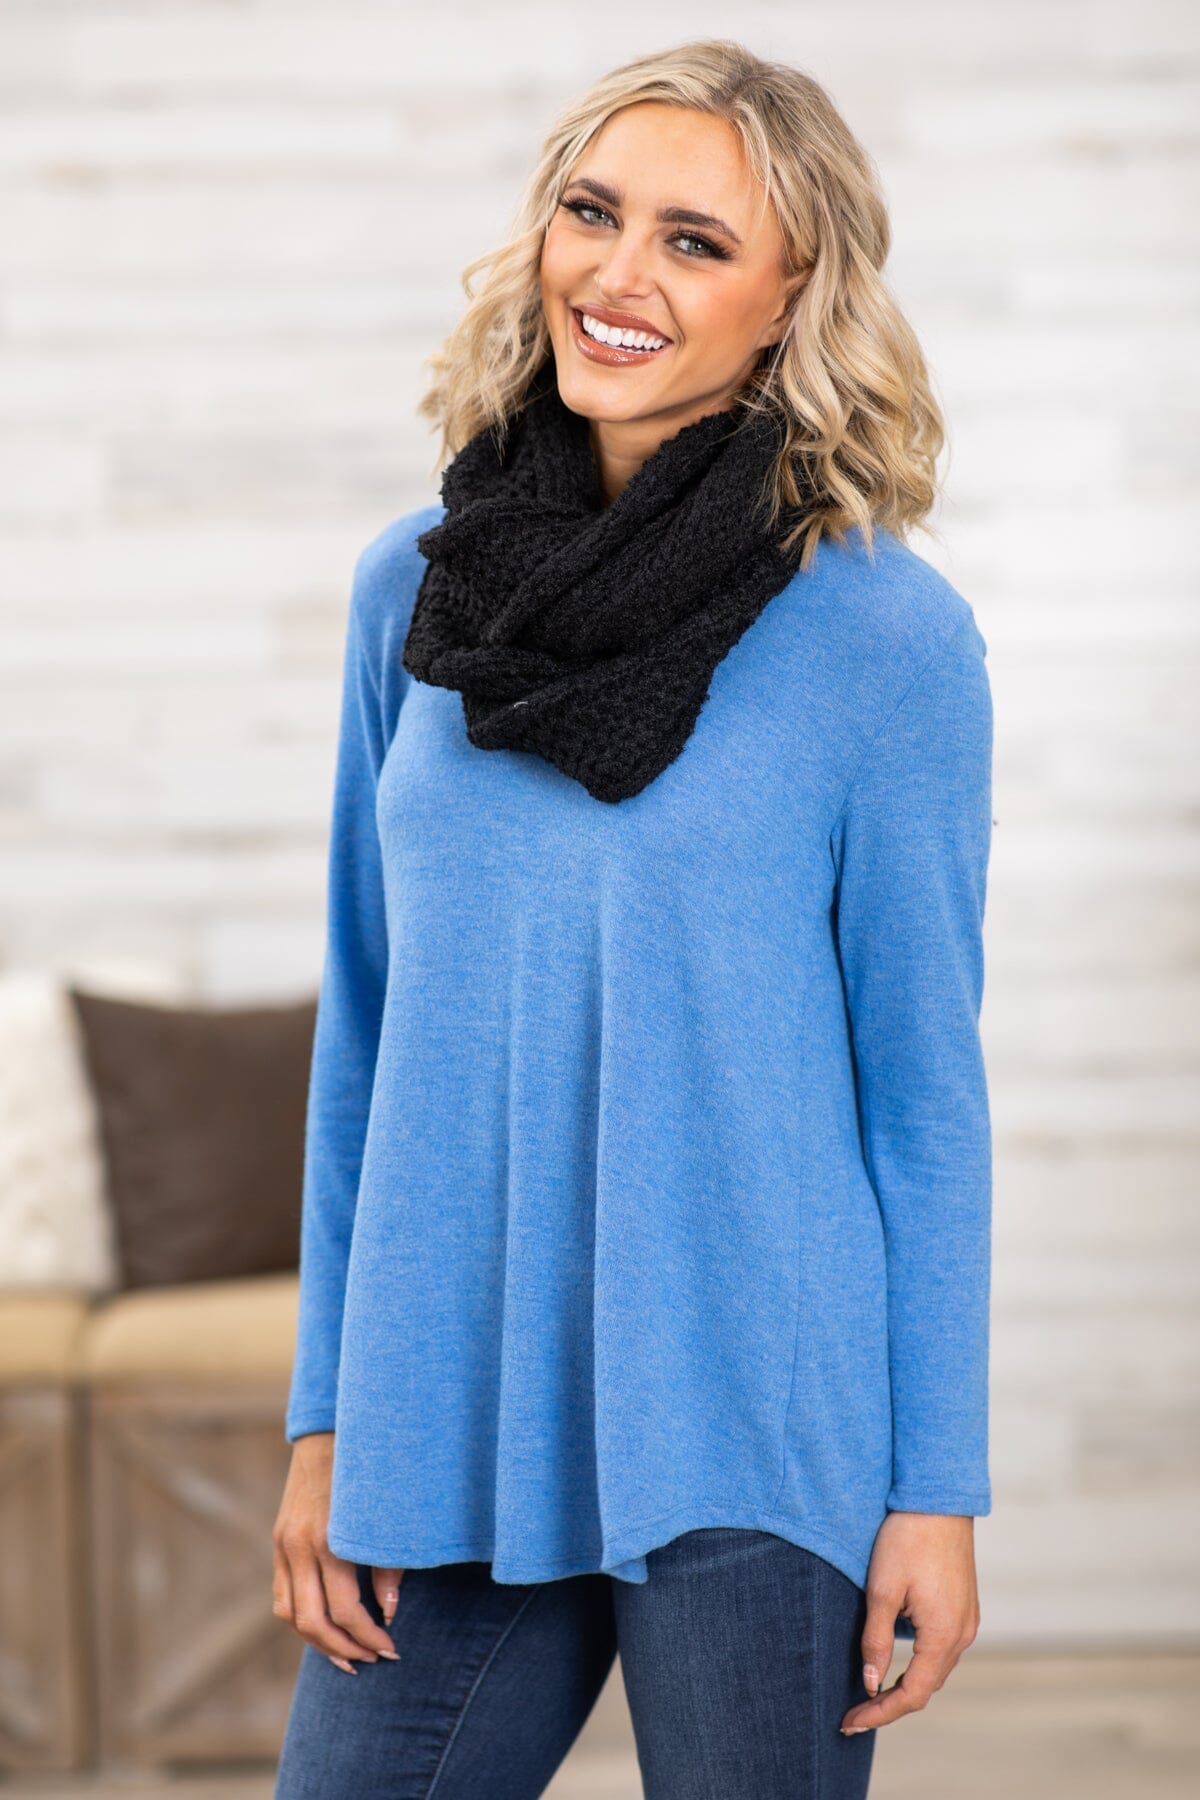 Cornflower Top and Black Infinity Scarf Bundle - Filly Flair